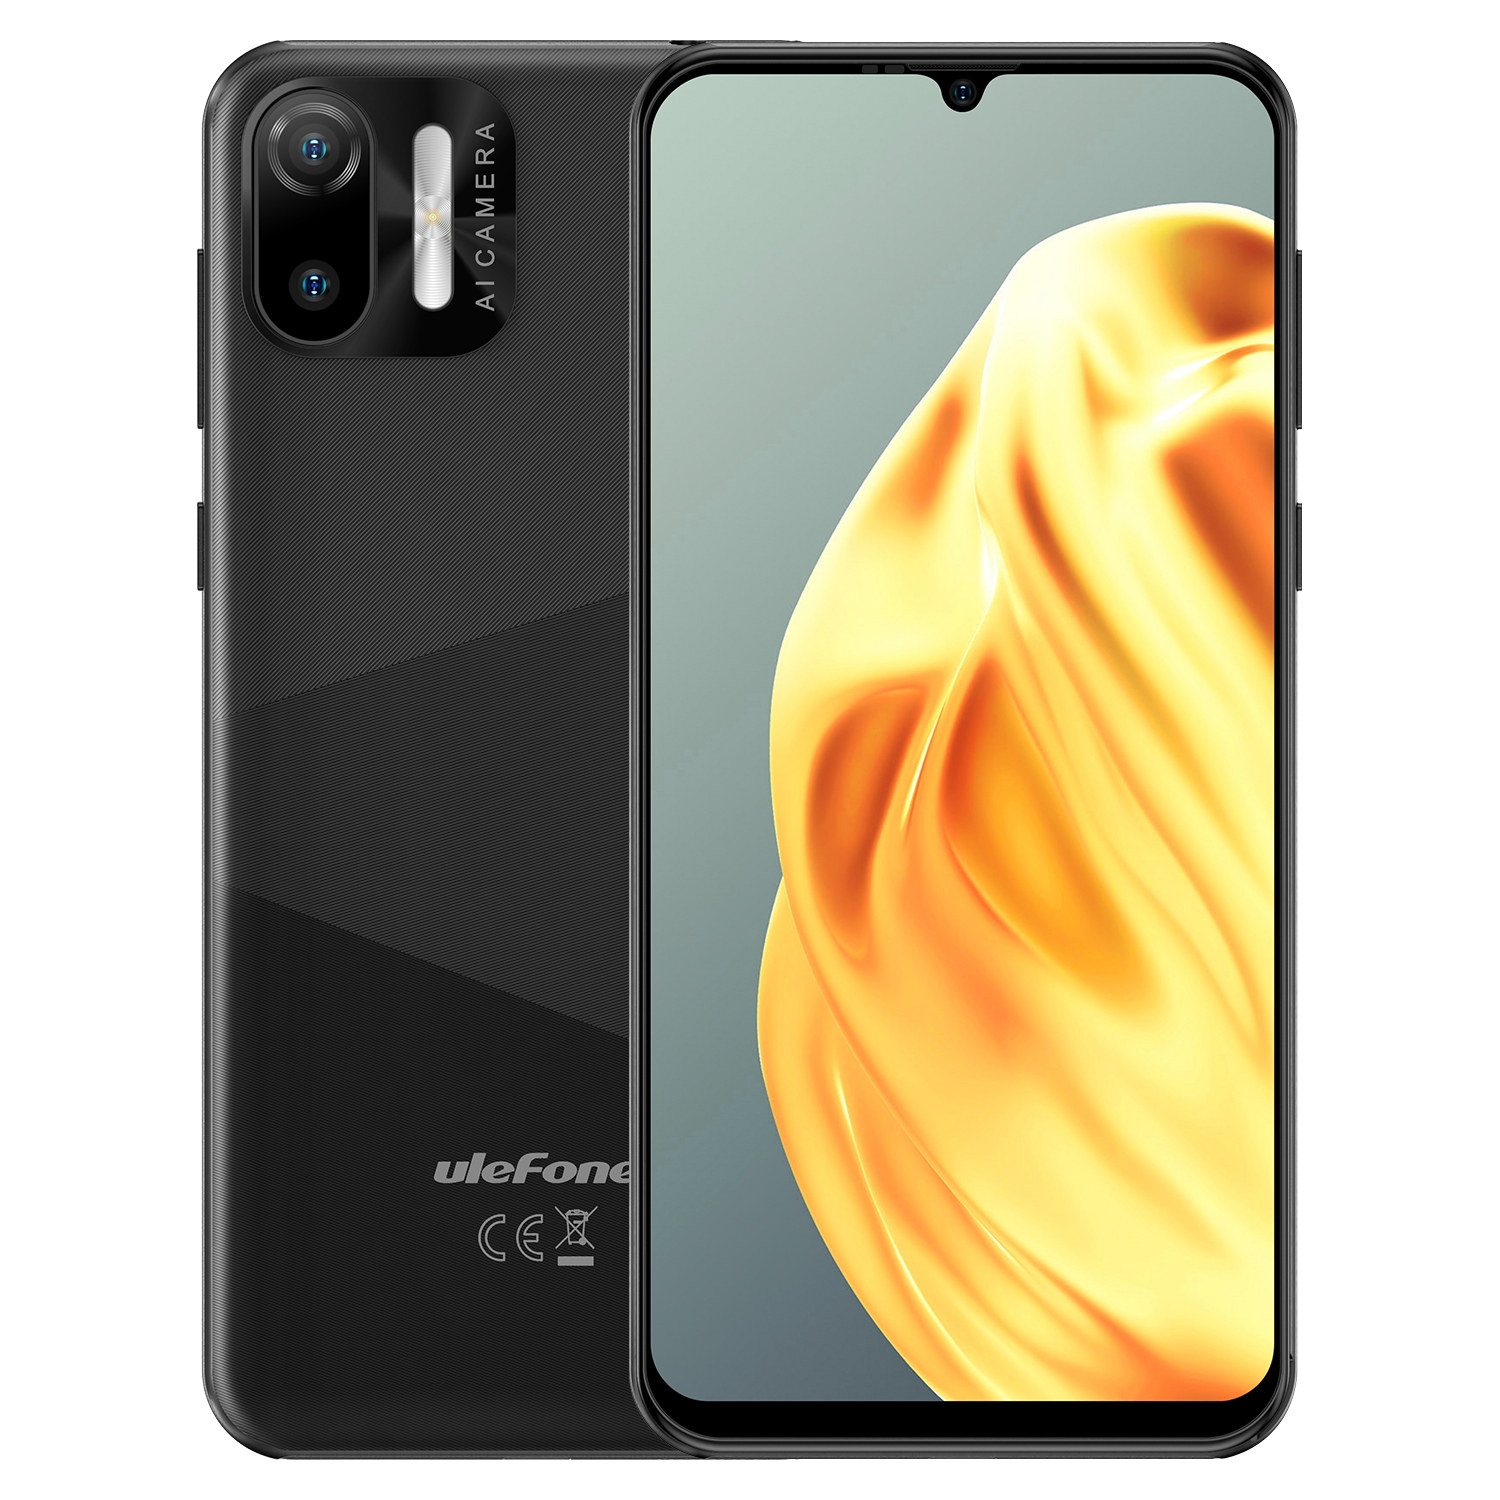 Ulefone Note 6, 1GB+32GB, Face ID Identification, 6.1 inch Android 11 GO SC7731E Quad-core up to 1.3GHz, Network: 3G, Dual SIM(Black)